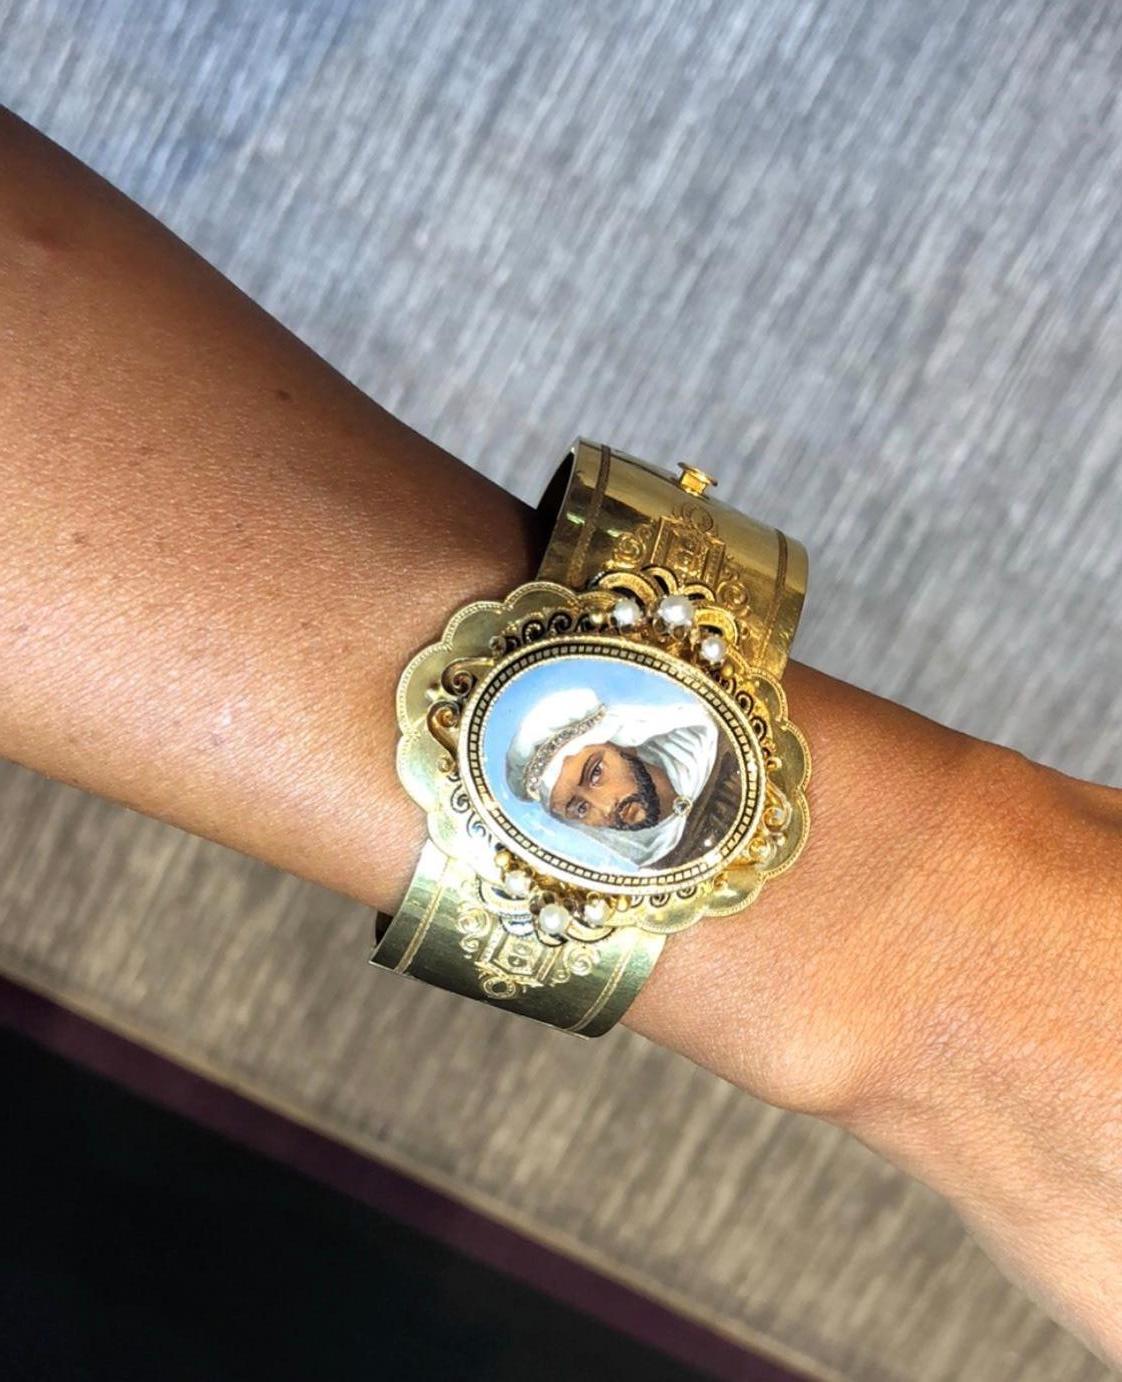 Gold and Enamel Portrait Cuff Bracelet In Excellent Condition For Sale In New York, NY